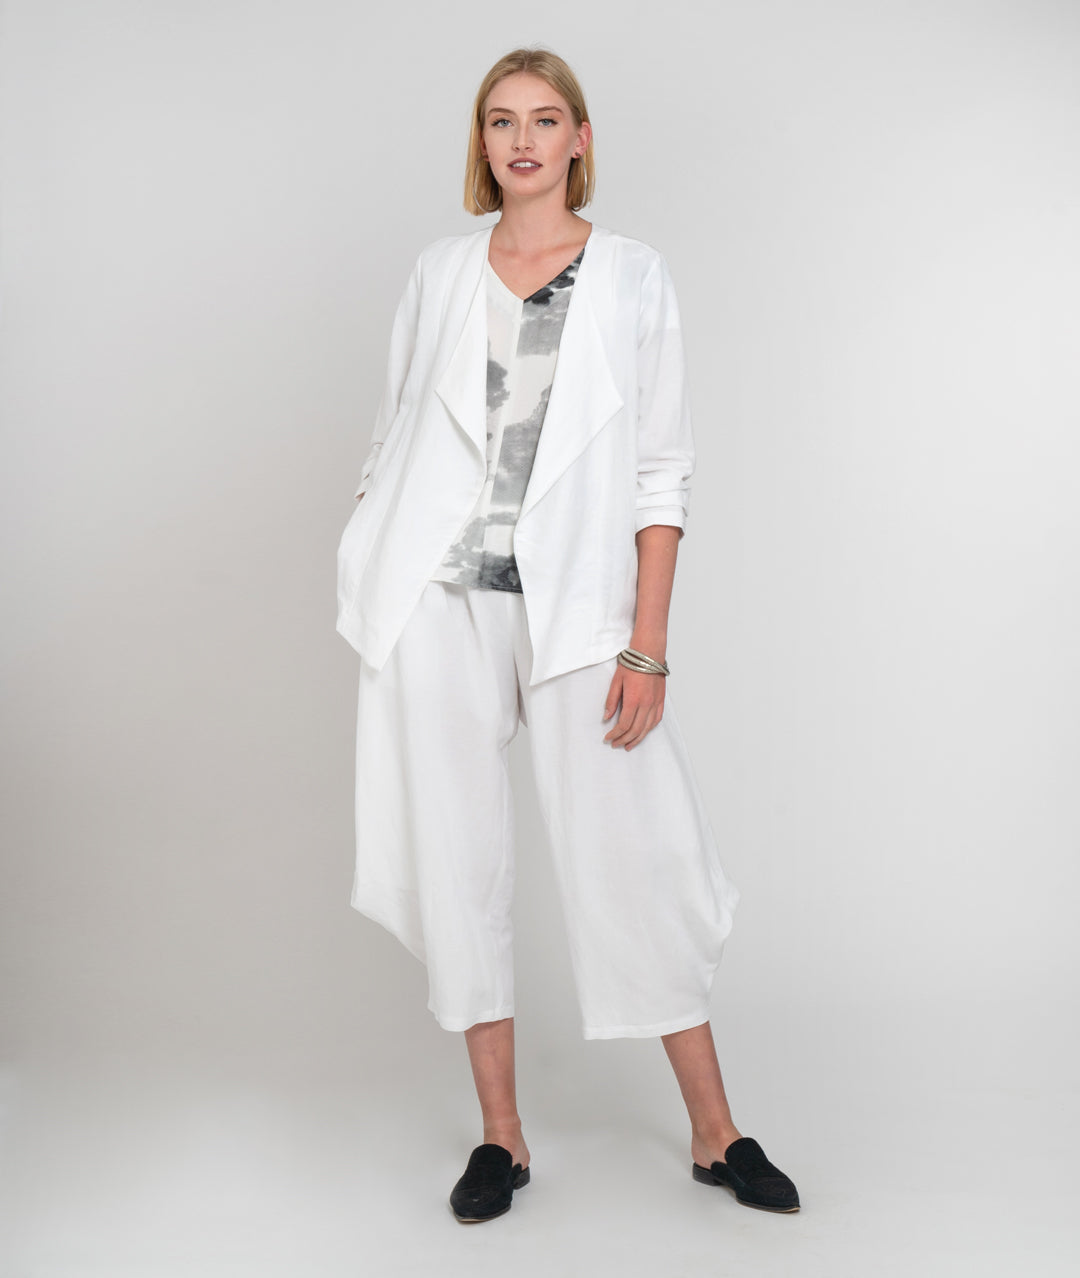 model in a wide white pant with a grey and white print top, and a white jacket with an exaggerated collar